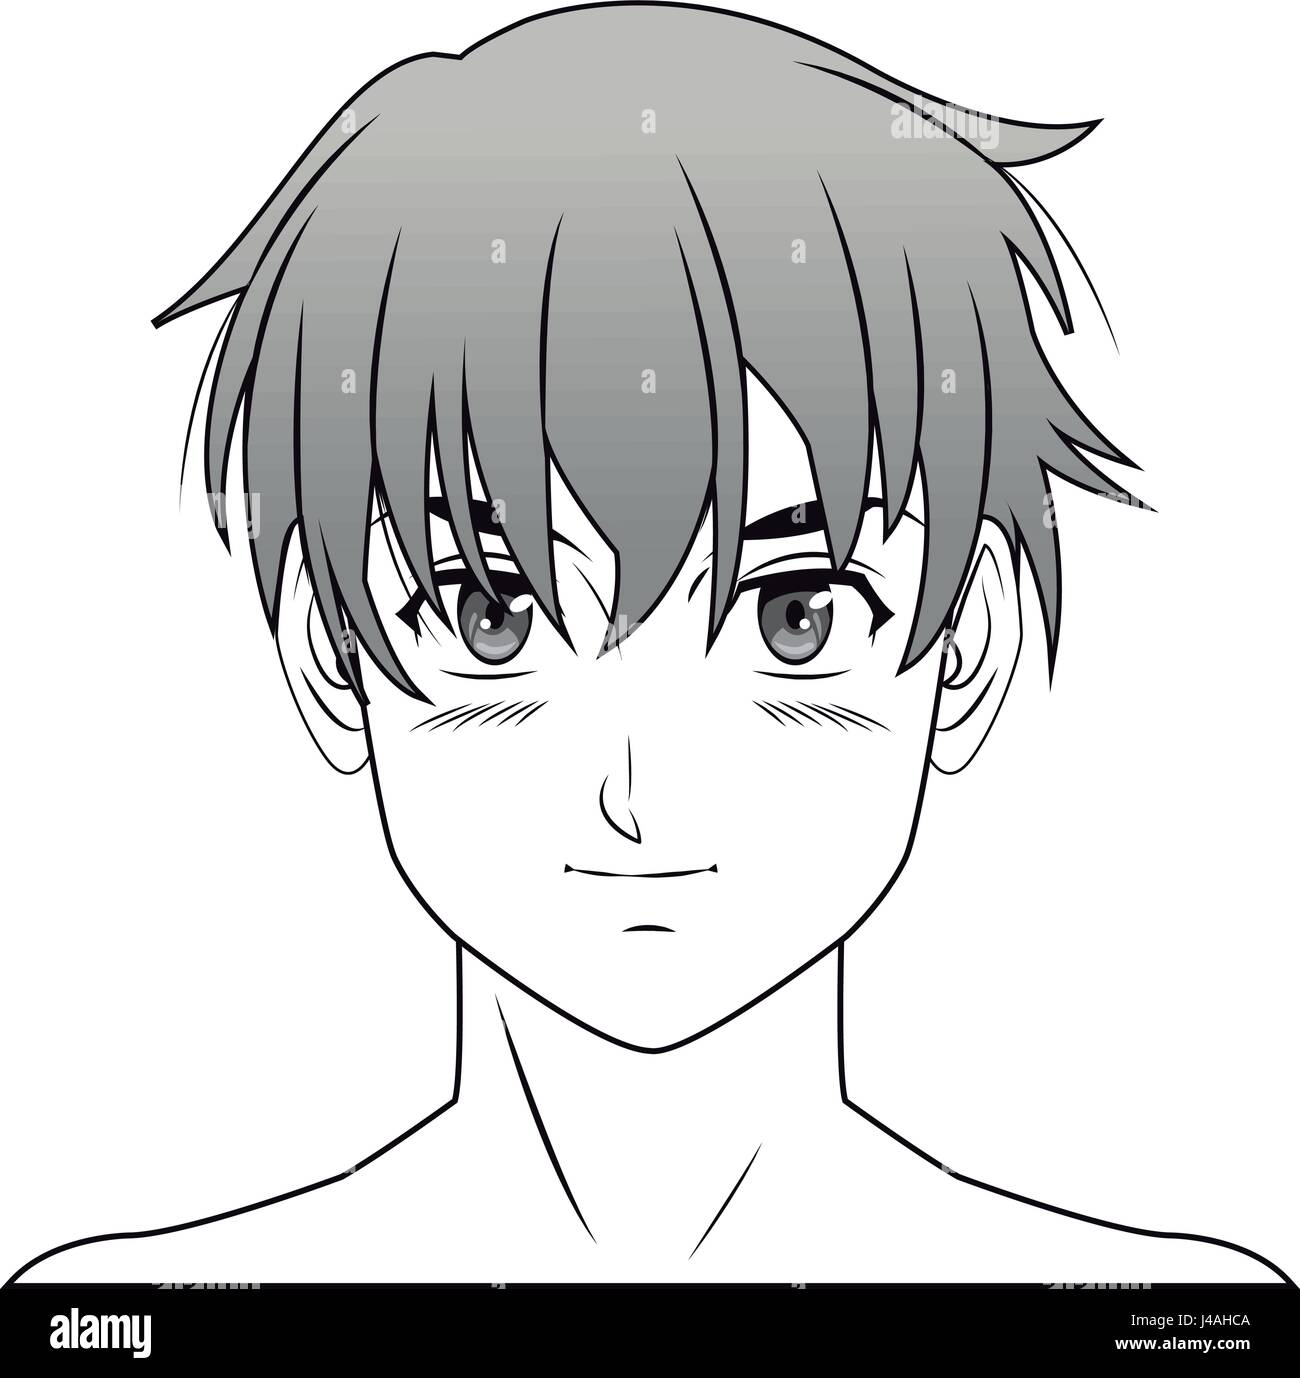 draw avatar, character, icon, profile picture in anime style